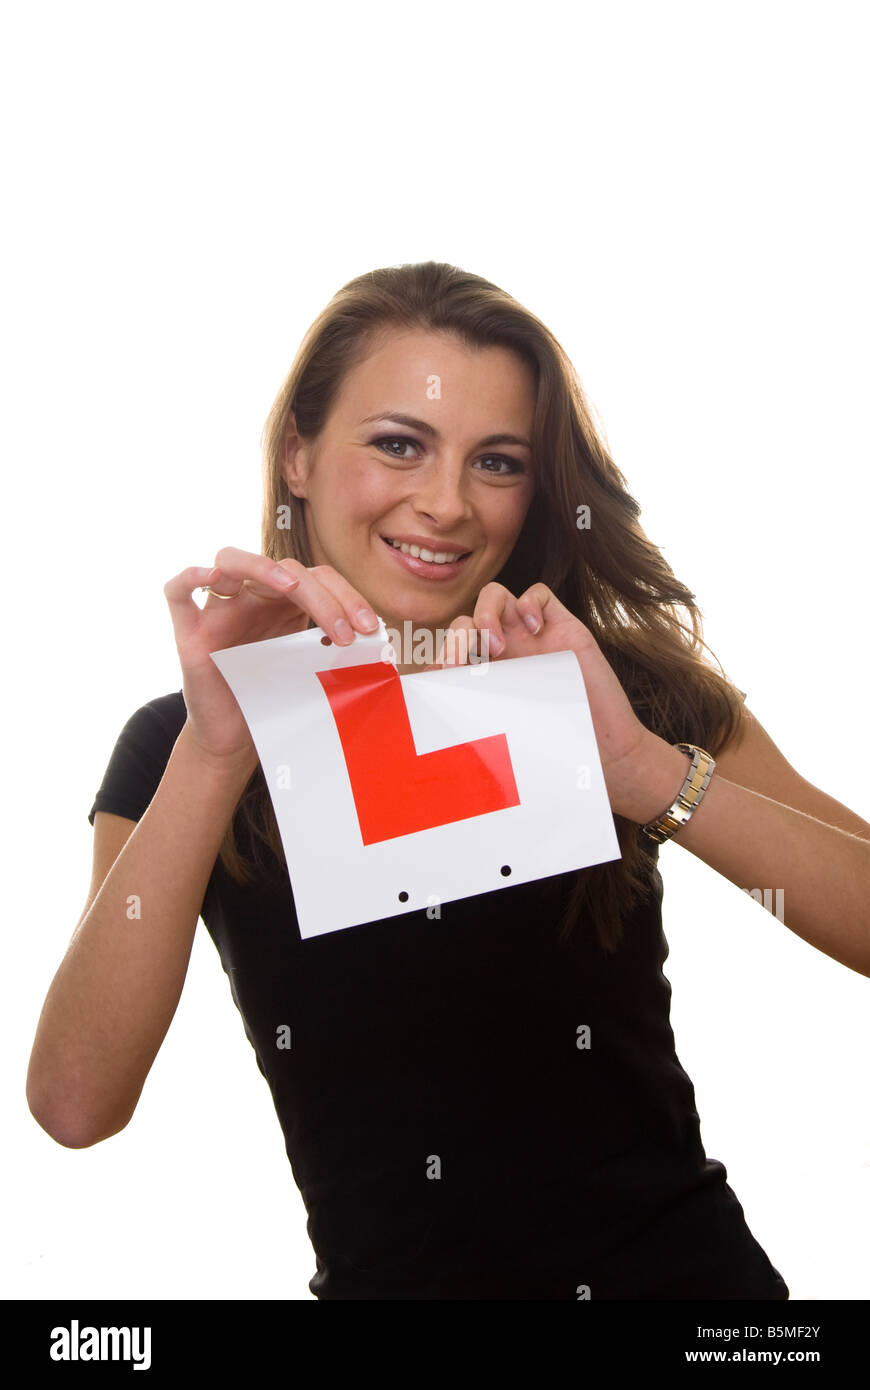 woman tearing up L plates Stock Photo